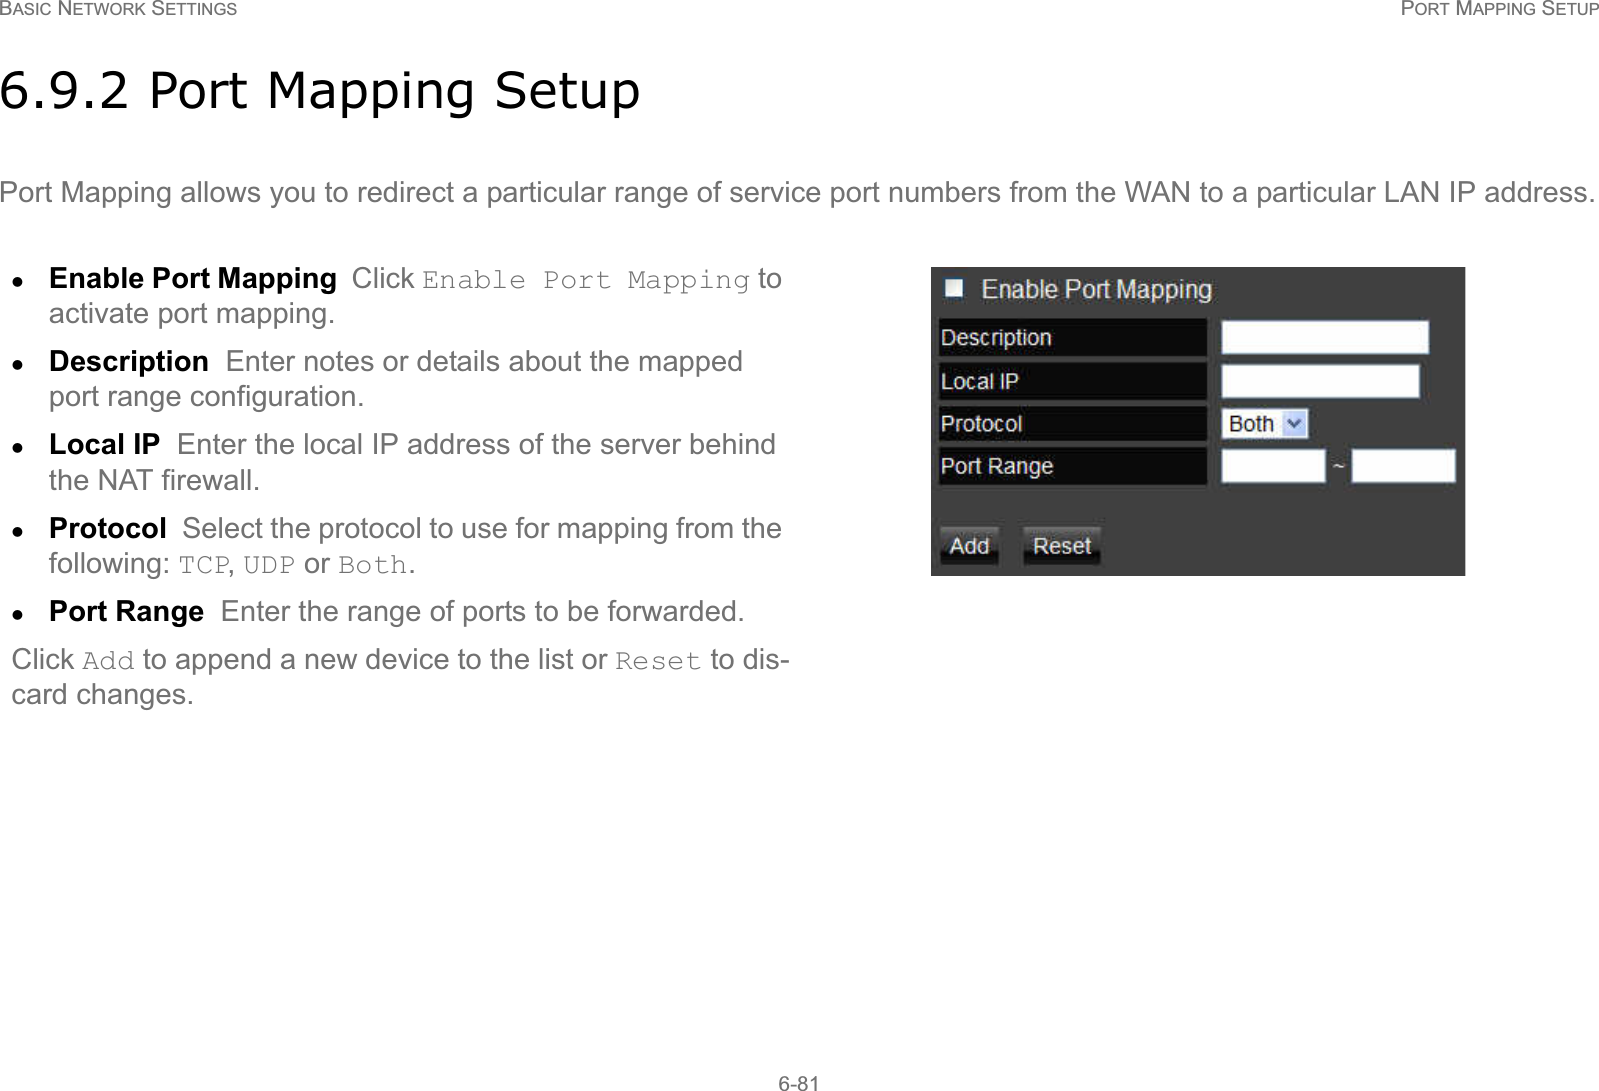 BASIC NETWORK SETTINGS PORT MAPPING SETUP6-816.9.2 Port Mapping SetupPort Mapping allows you to redirect a particular range of service port numbers from the WAN to a particular LAN IP address.zEnable Port Mapping  Click Enable Port Mapping to activate port mapping.zDescription  Enter notes or details about the mapped port range configuration.zLocal IP  Enter the local IP address of the server behind the NAT firewall.zProtocol  Select the protocol to use for mapping from the following: TCP, UDP or Both.zPort Range  Enter the range of ports to be forwarded.Click Add to append a new device to the list or Reset to dis-card changes.